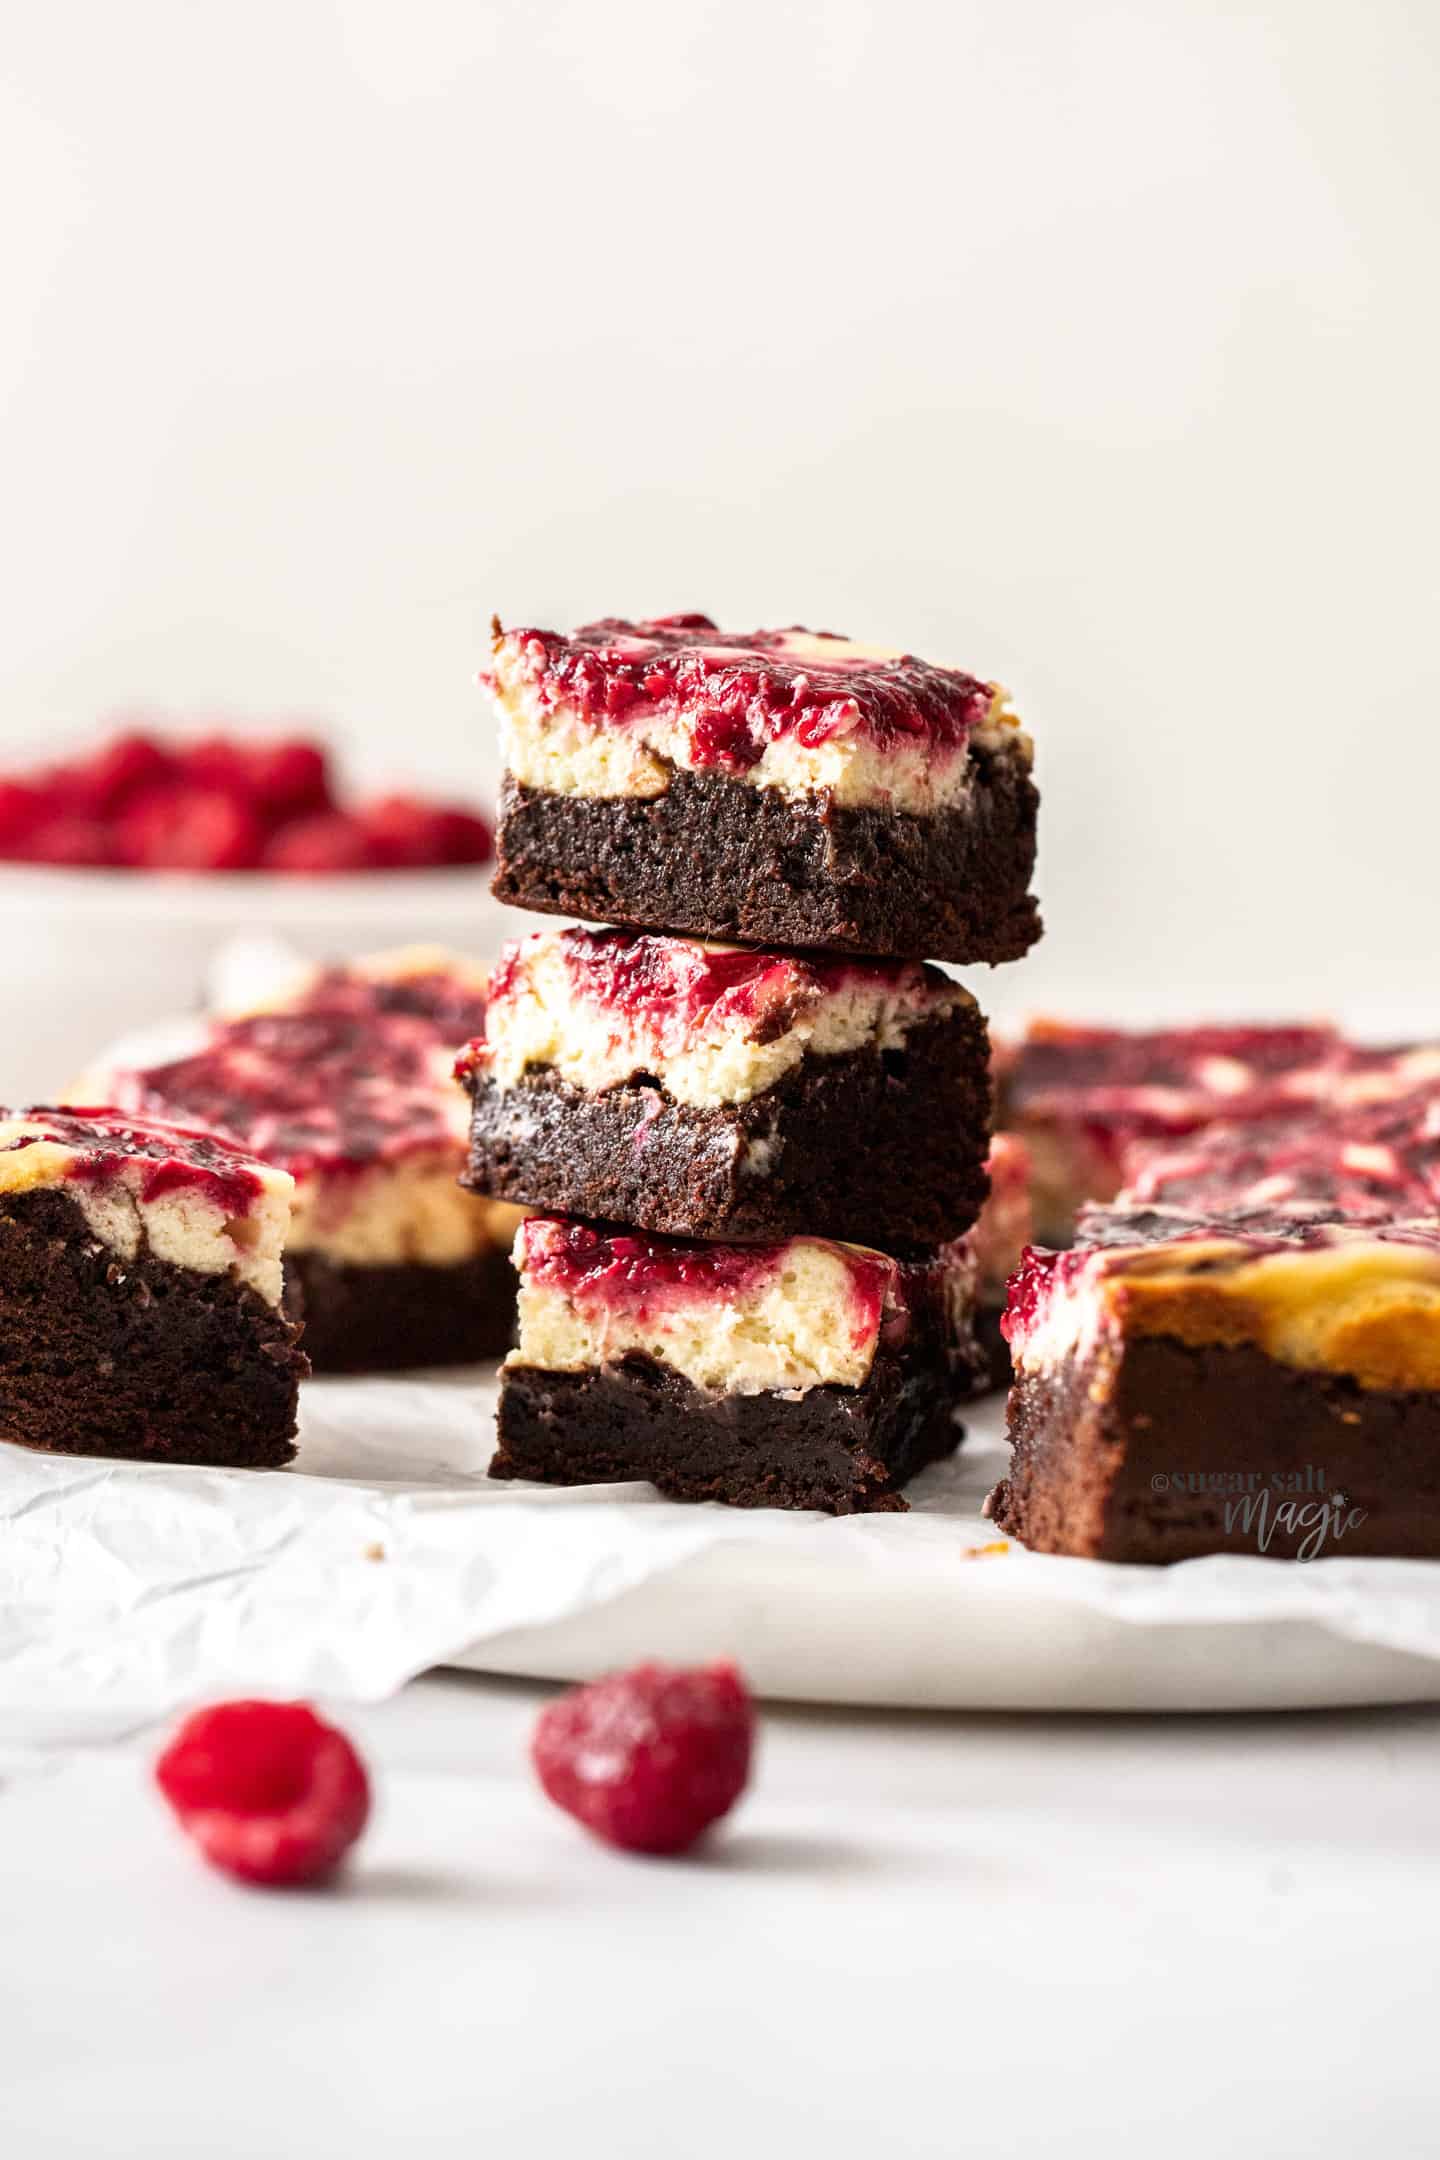 A stack of 3 raspberry topped brownies on a marble cake plate.